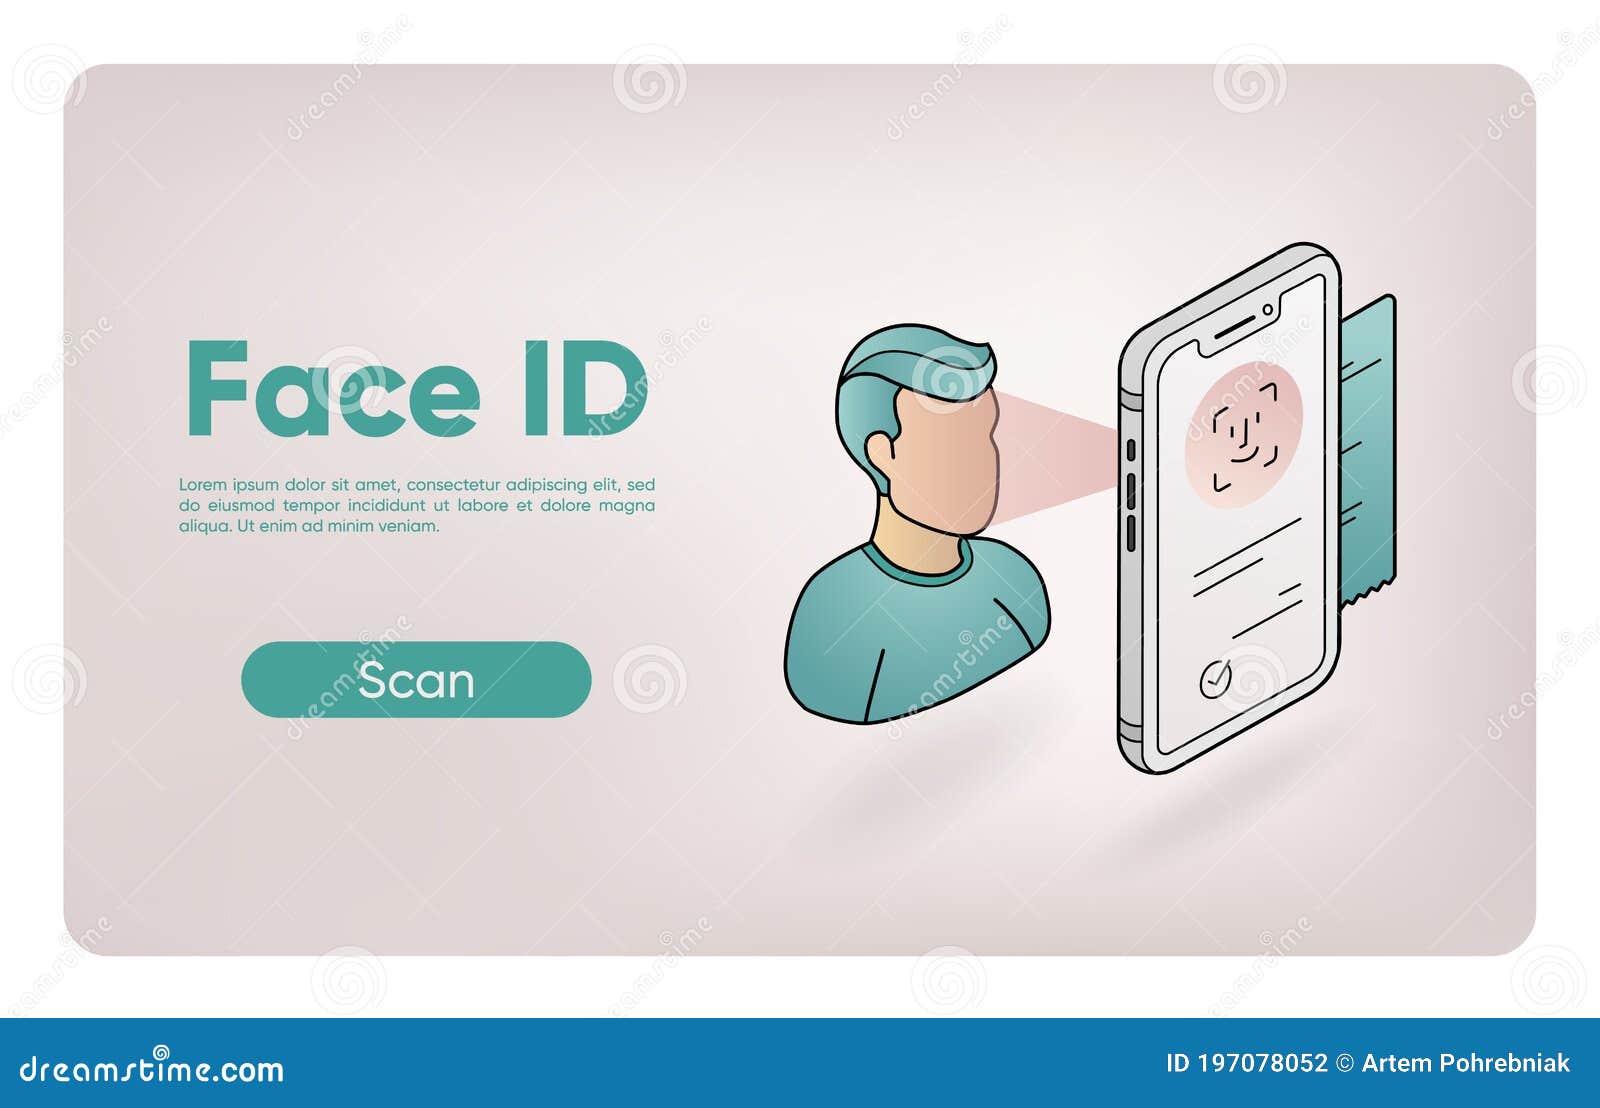 Face Id Banner. Facial Recognition. Verification Scanner App. Personal  Identity Scan. Biometric Password. Modern Identification Stock Illustration  - Illustration of information, identity: 197078052